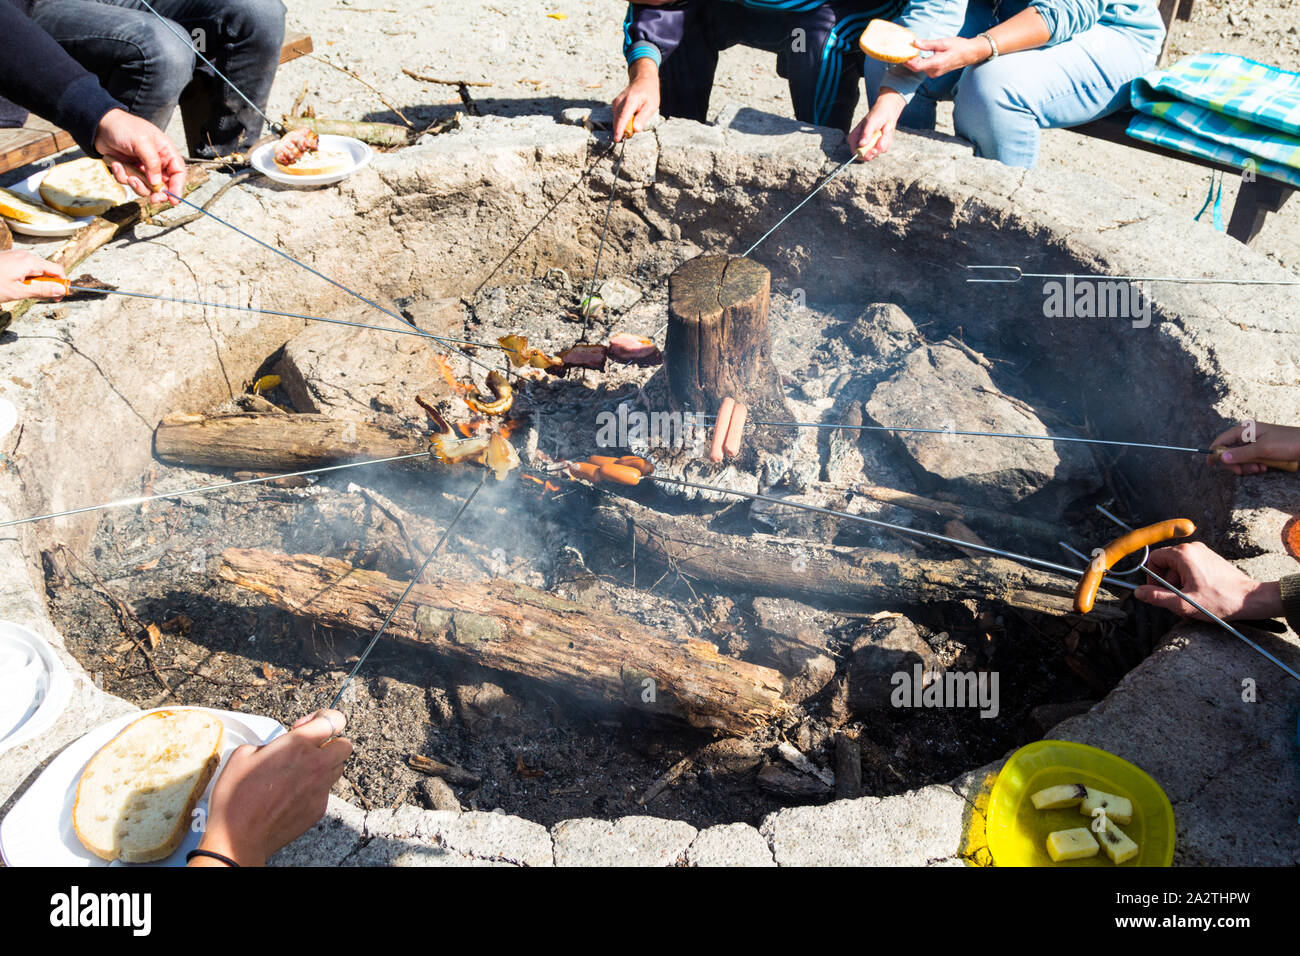 Szalonnasutes (outdoor roasting fatty bacon and frankfurter on skewer) over glowing smoldering smouldering wood logs in Sopron, Hungary Stock Photo